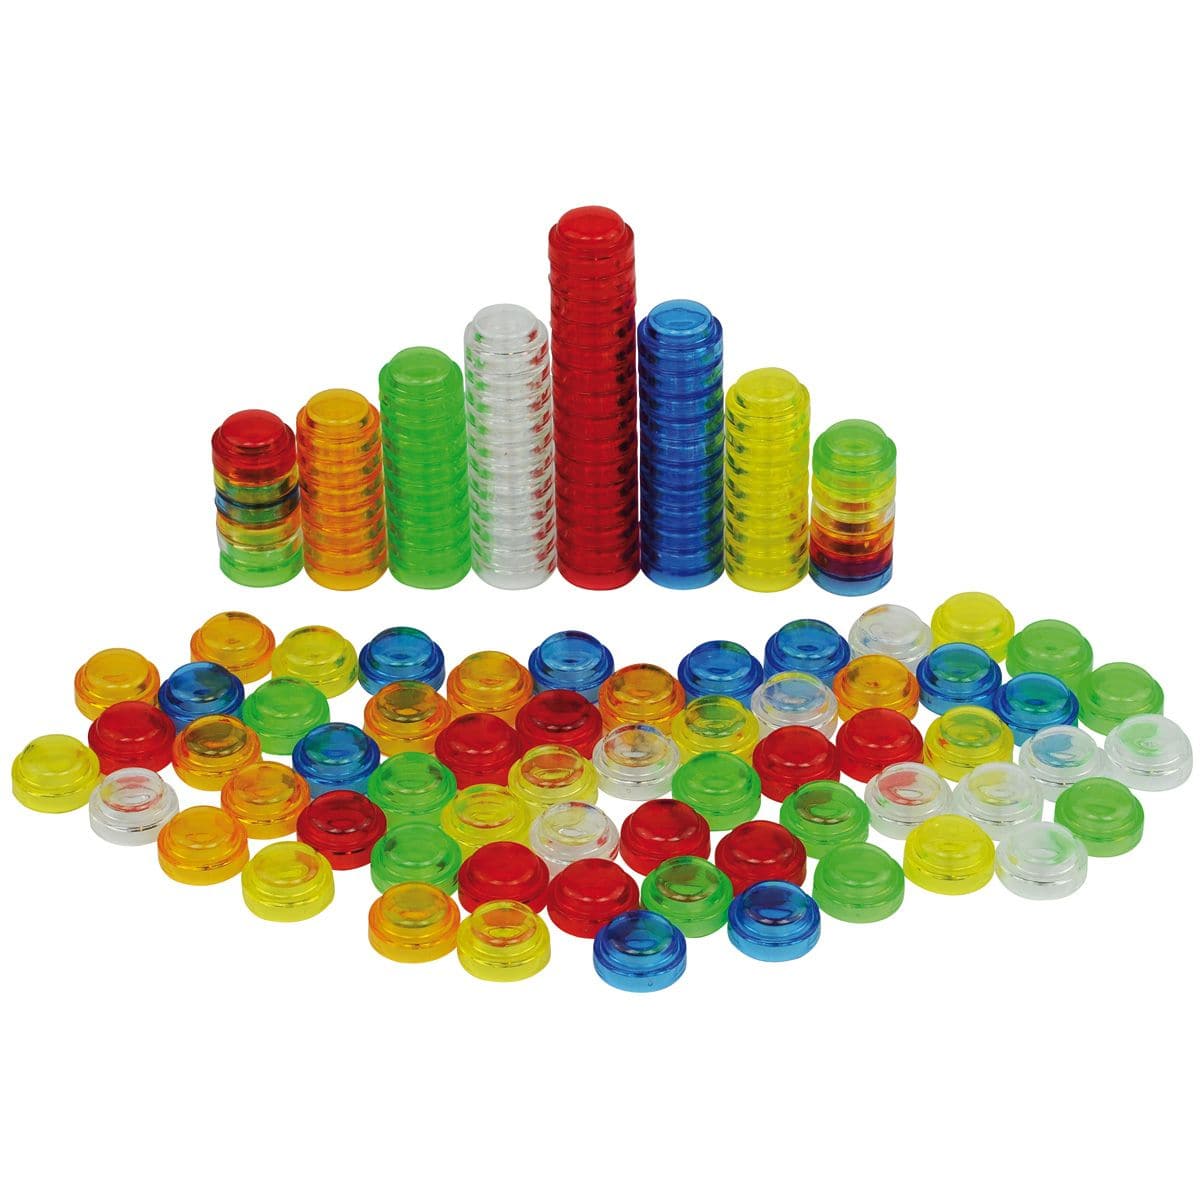 Translucent Stackable Counters 500 Piece, Translucent plastic counters in 6 colours that can be stacked into towers or used for counting, sorting, pattern-making and sequencing. The Translucent Stackable Counters come in a convenient storage container. TickiT® Translucent Stackable Counters is a set of colour acrylic counters which easily stack together so your child can create vibrant translucent towers.Perfect for use on a light panel where structures look even more impressive with the light shining throu